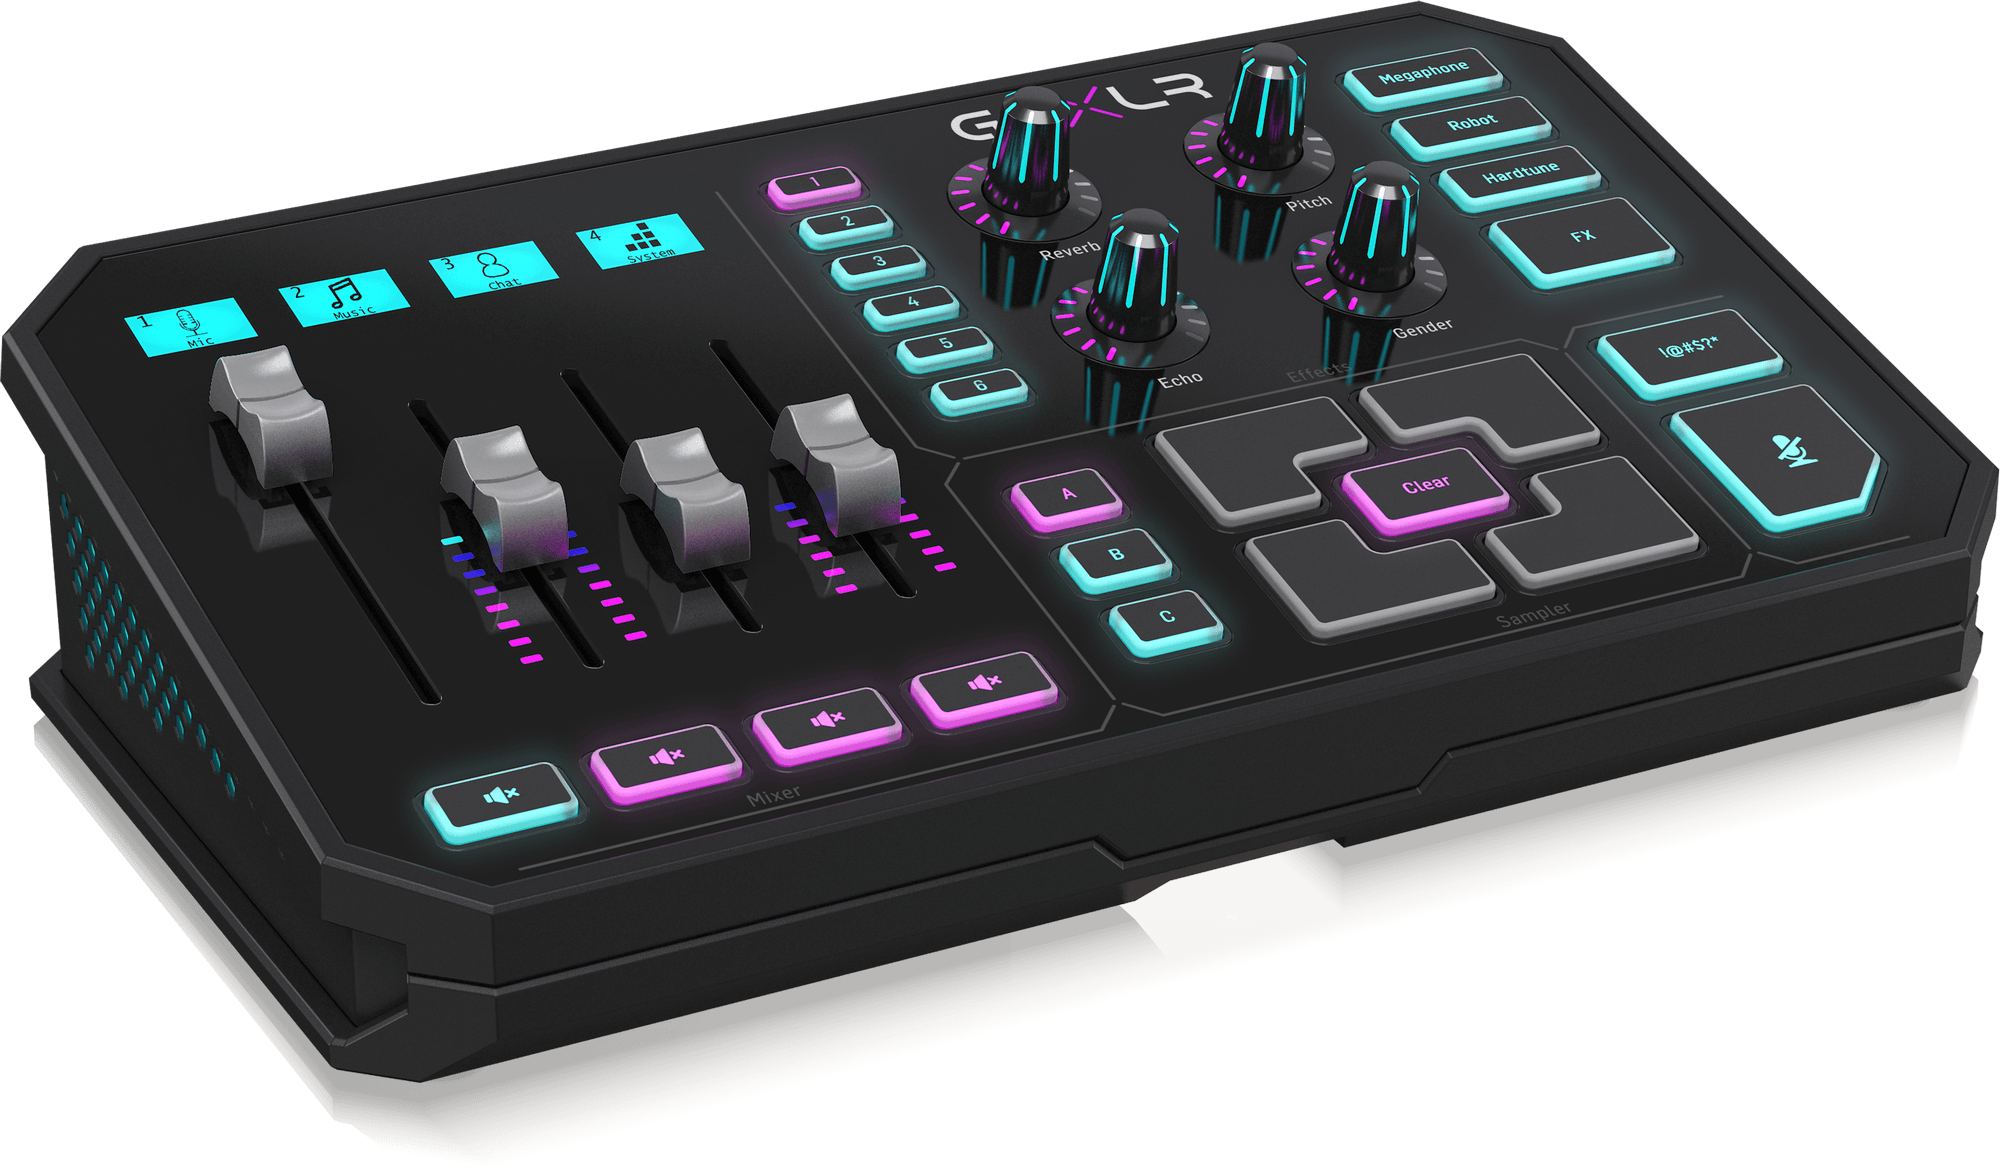 TC HELICON GoXLR REVOLUTIONARY ONLINE BROADCASTER PLATFORM WITH 4-CHANNEL MIXER, MOTORIZED FADERS, SOUND BOARD AND VOCAL EFFECTS, TC HELICON, BROADCAST CONSOLE, tc-helicon-broadcast-console-goxlr, ZOSO MUSIC SDN BHD